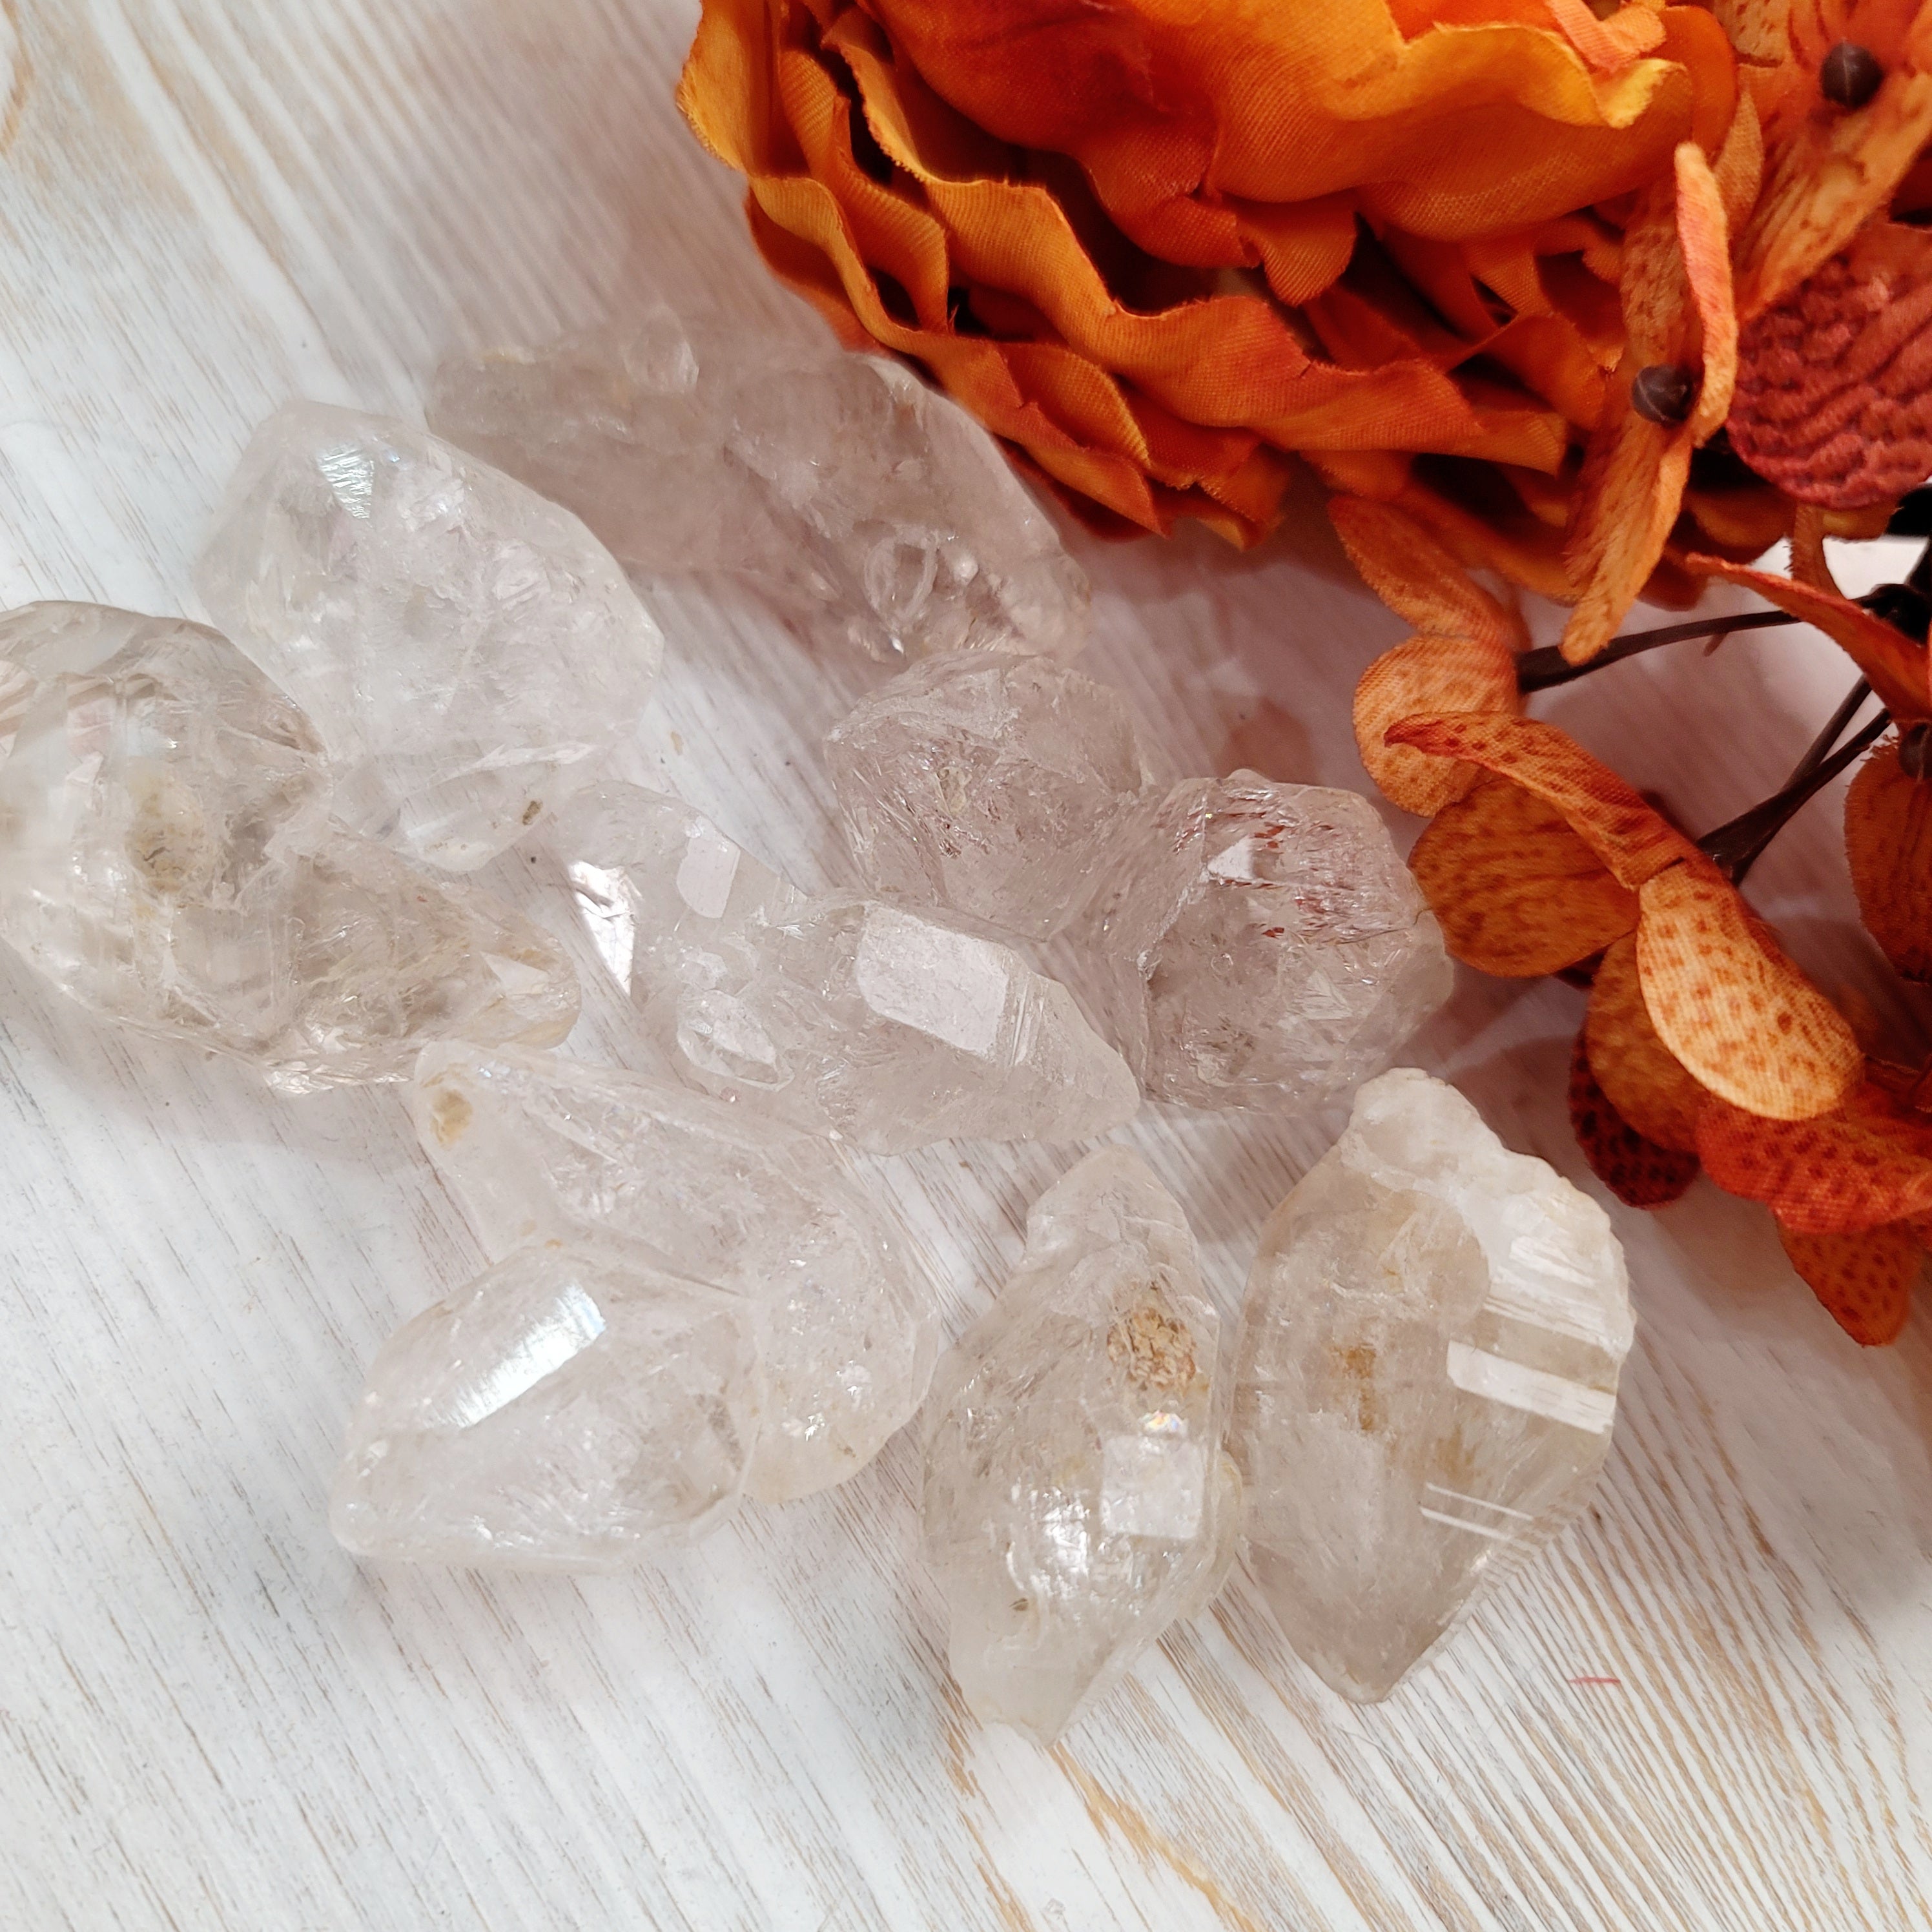 Elestrial Quartz for Healing, Manifesting and Setting Intentions